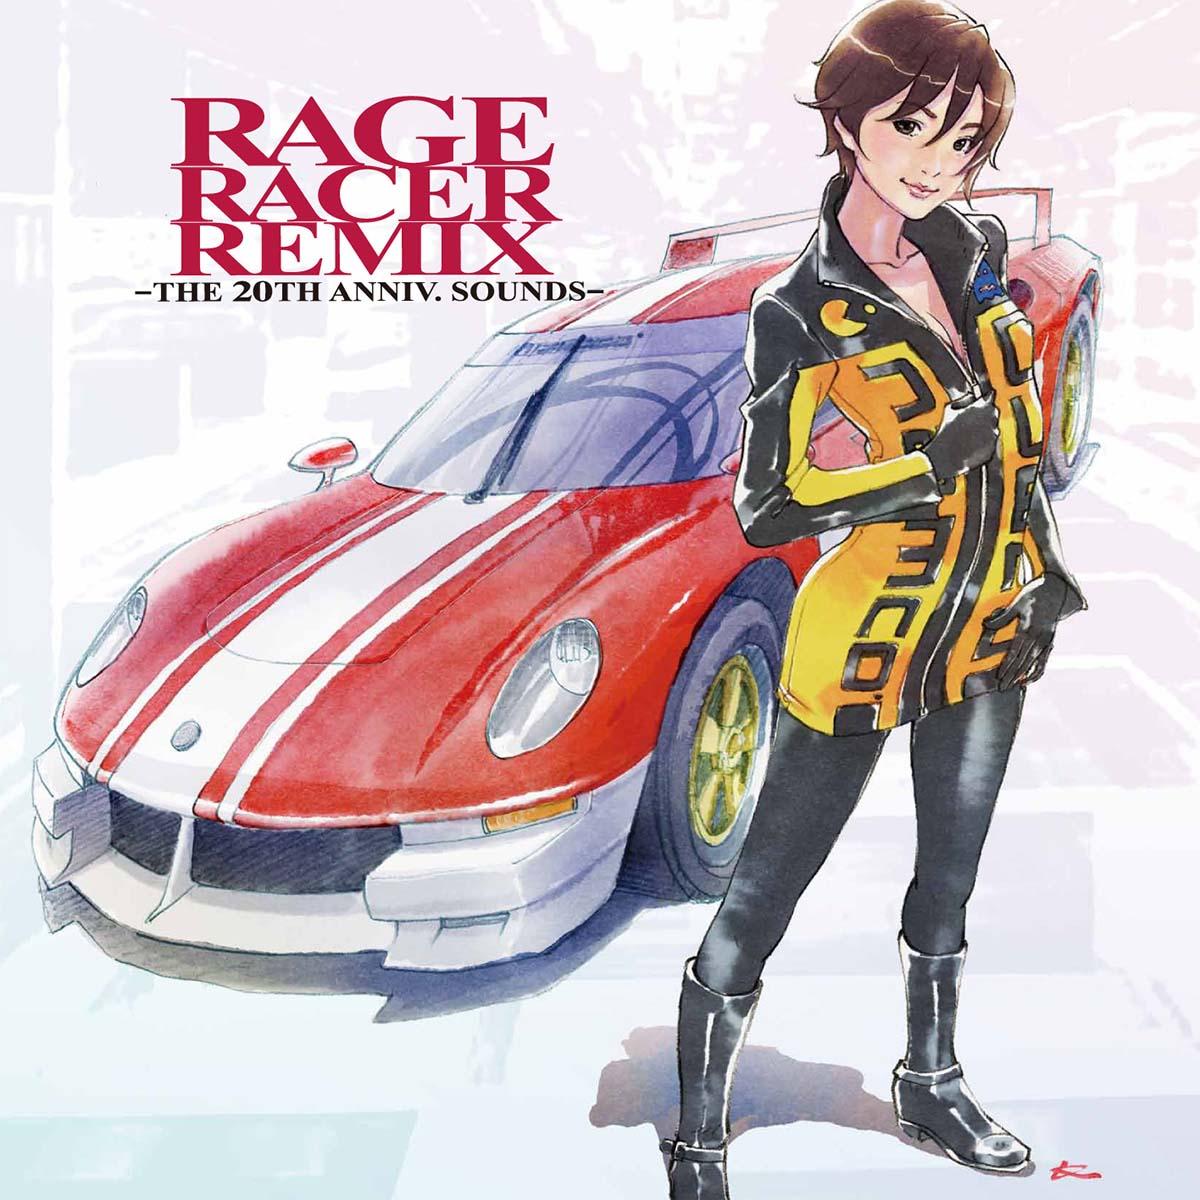 Rage Racer Remix - THE 20TH ANNIV. SOUNDS